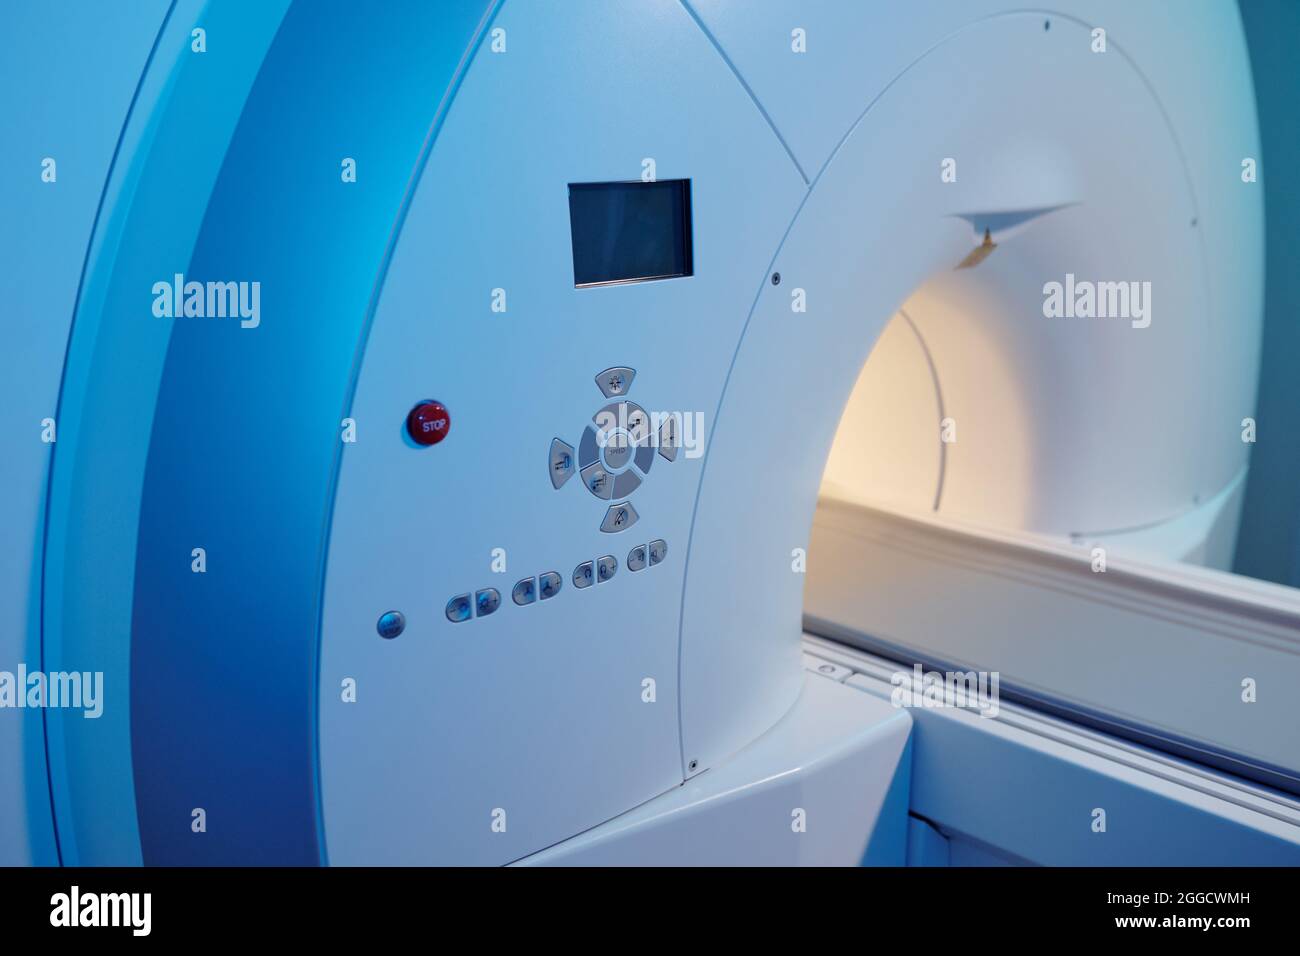 Part of large computer tomography machine with small display and number of buttons Stock Photo